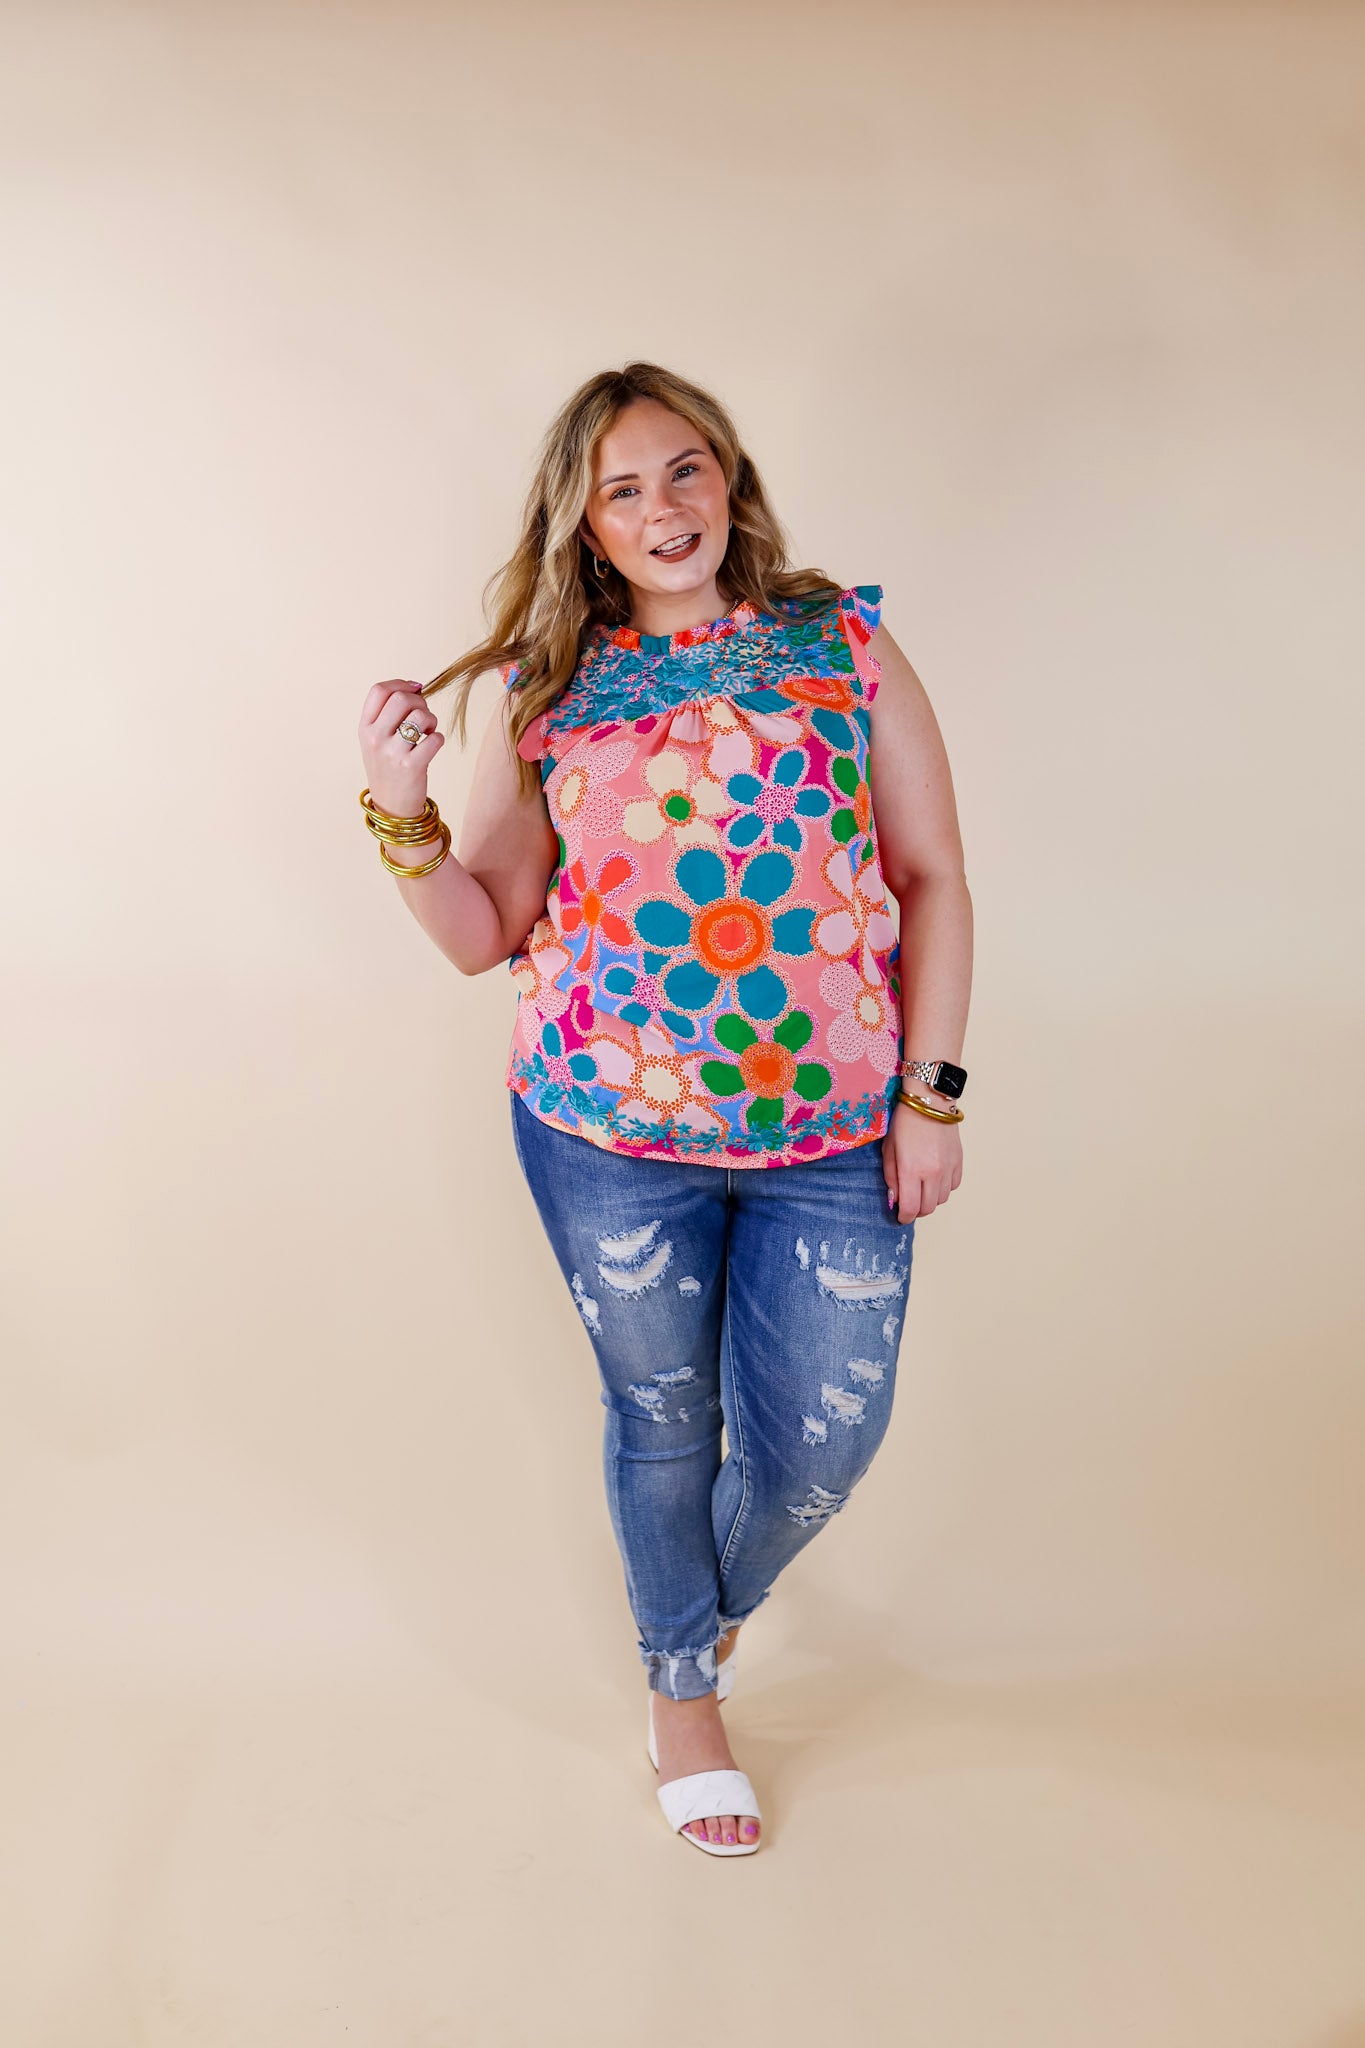 Timeless Treasure Floral Print Top with Ruffle Cap Sleeves and Turquoise Embroidery in Coral Pink - Giddy Up Glamour Boutique